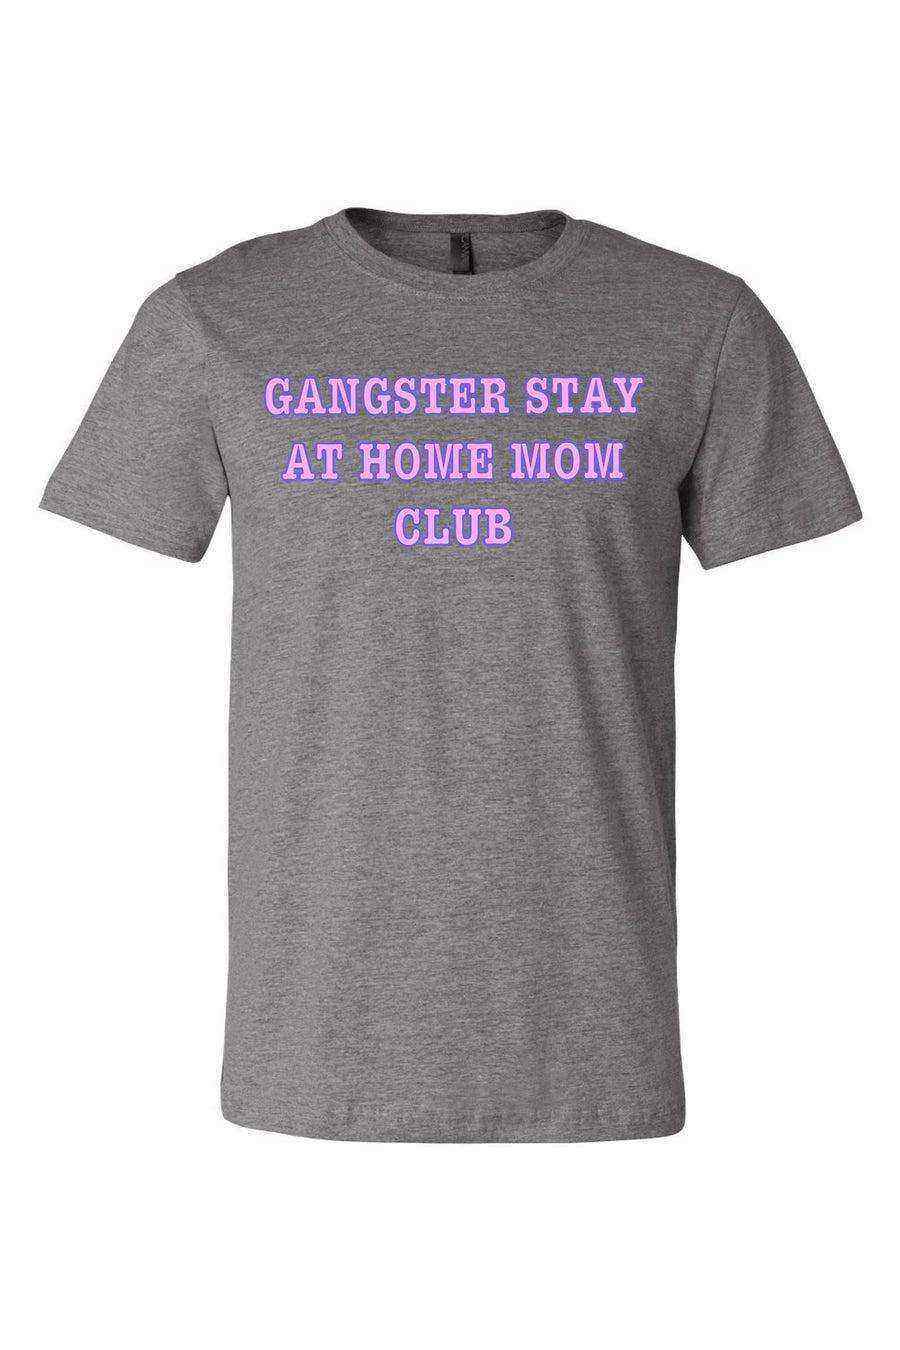 Toddler | Gangster Stay At Home Mom Club Shirt - Dylan's Tees